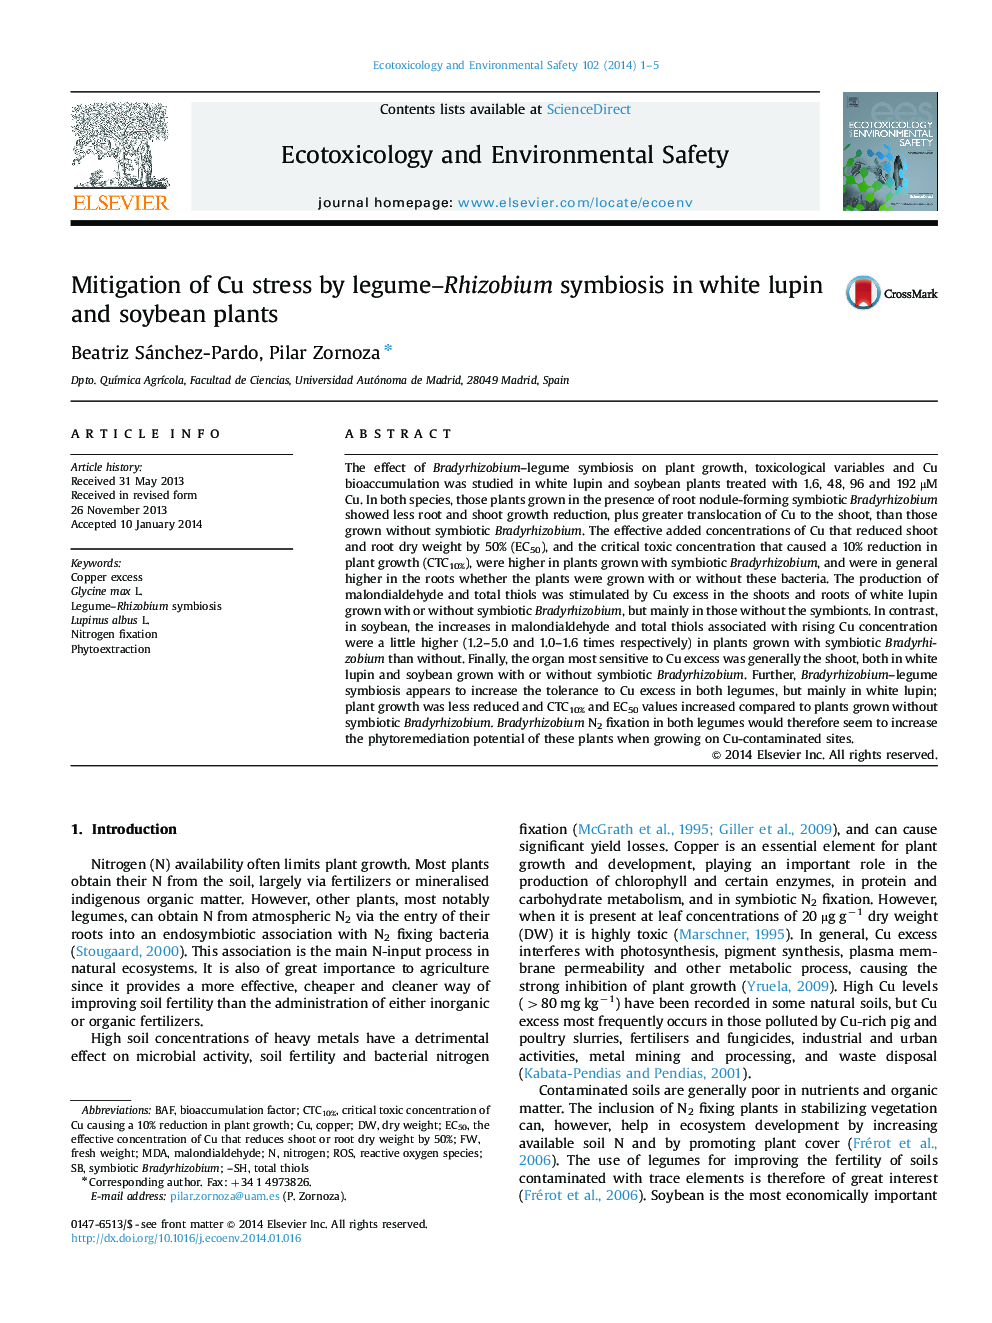 Mitigation of Cu stress by legume-Rhizobium symbiosis in white lupin and soybean plants